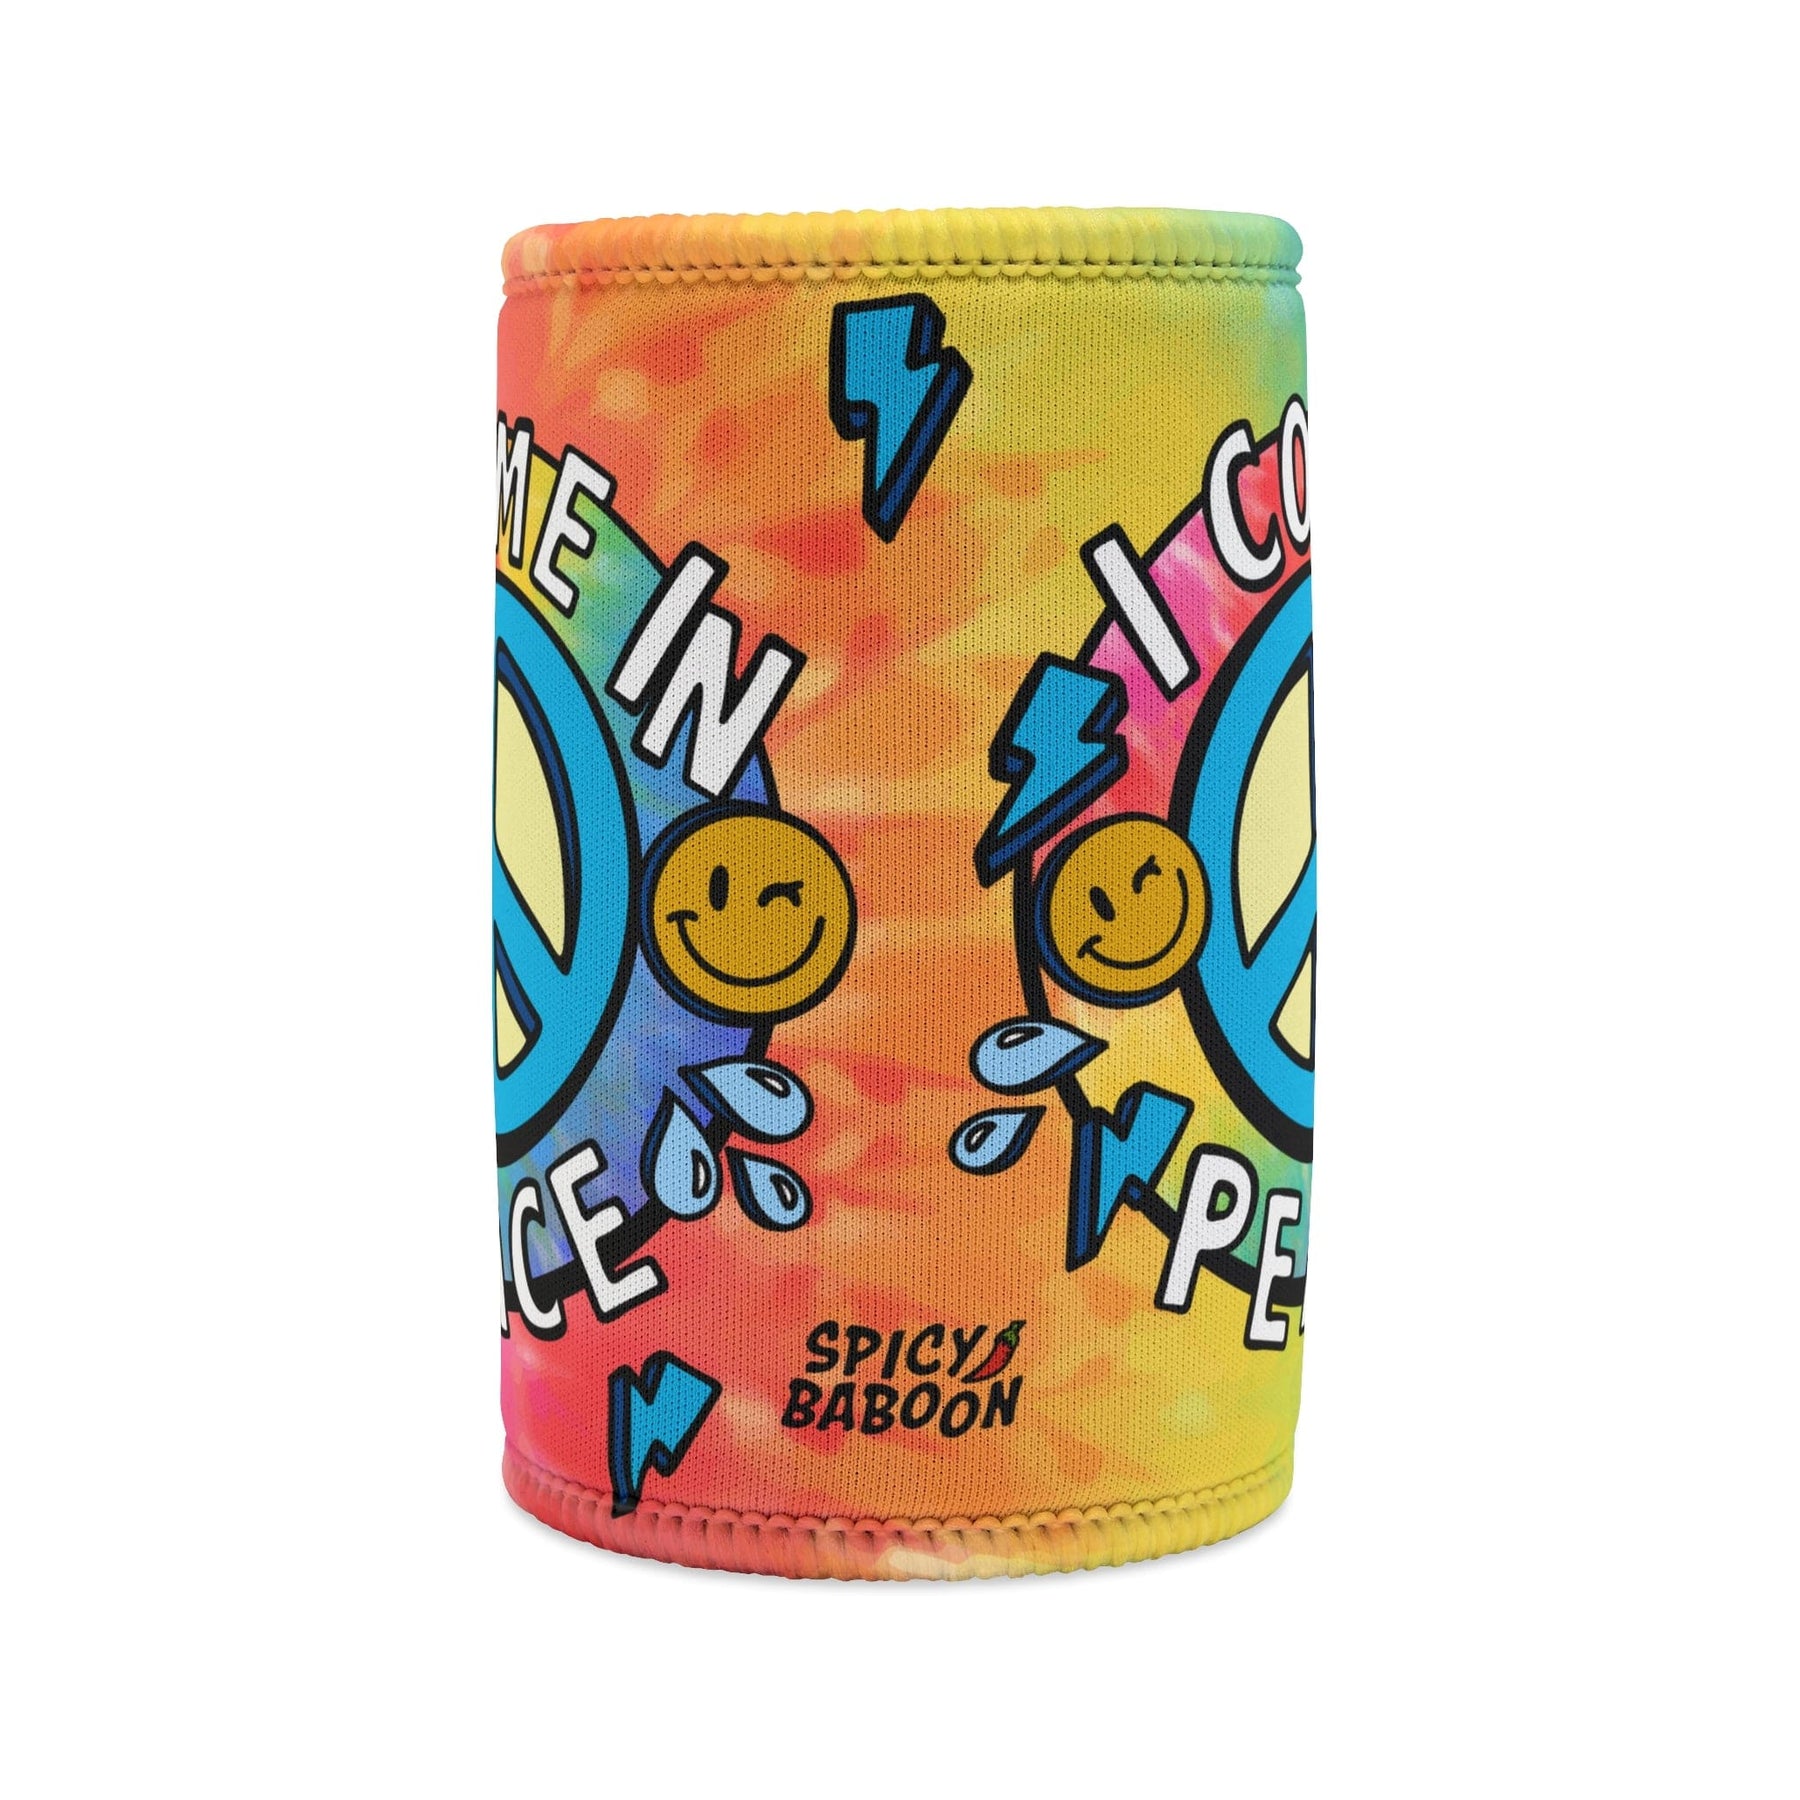 Peace & I Come In Peace ☮️ – Stubby Holder (Pair)